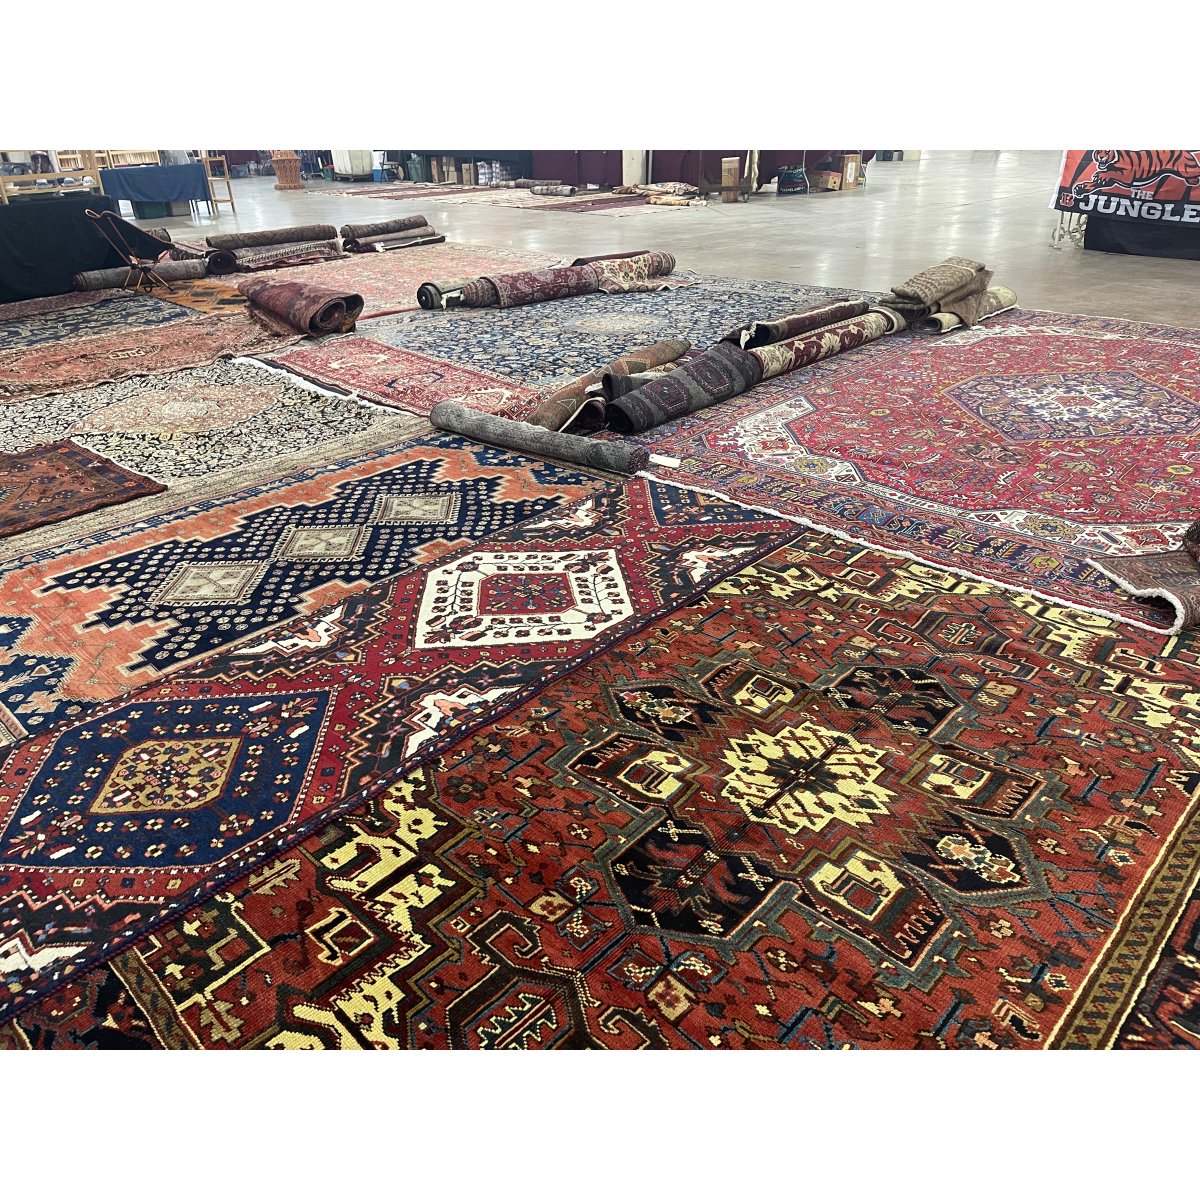 Check out the Scott's antique Market this weekend in Columbus !! 

 #columbusohio #orientalrug #rug #persian #handknotted #handwoven #handmade #runner #arearug   #persianrug  #daytonohio #vintagerug #antiquerug  #antique #vintage  #columbus #ohio #daytoninspires